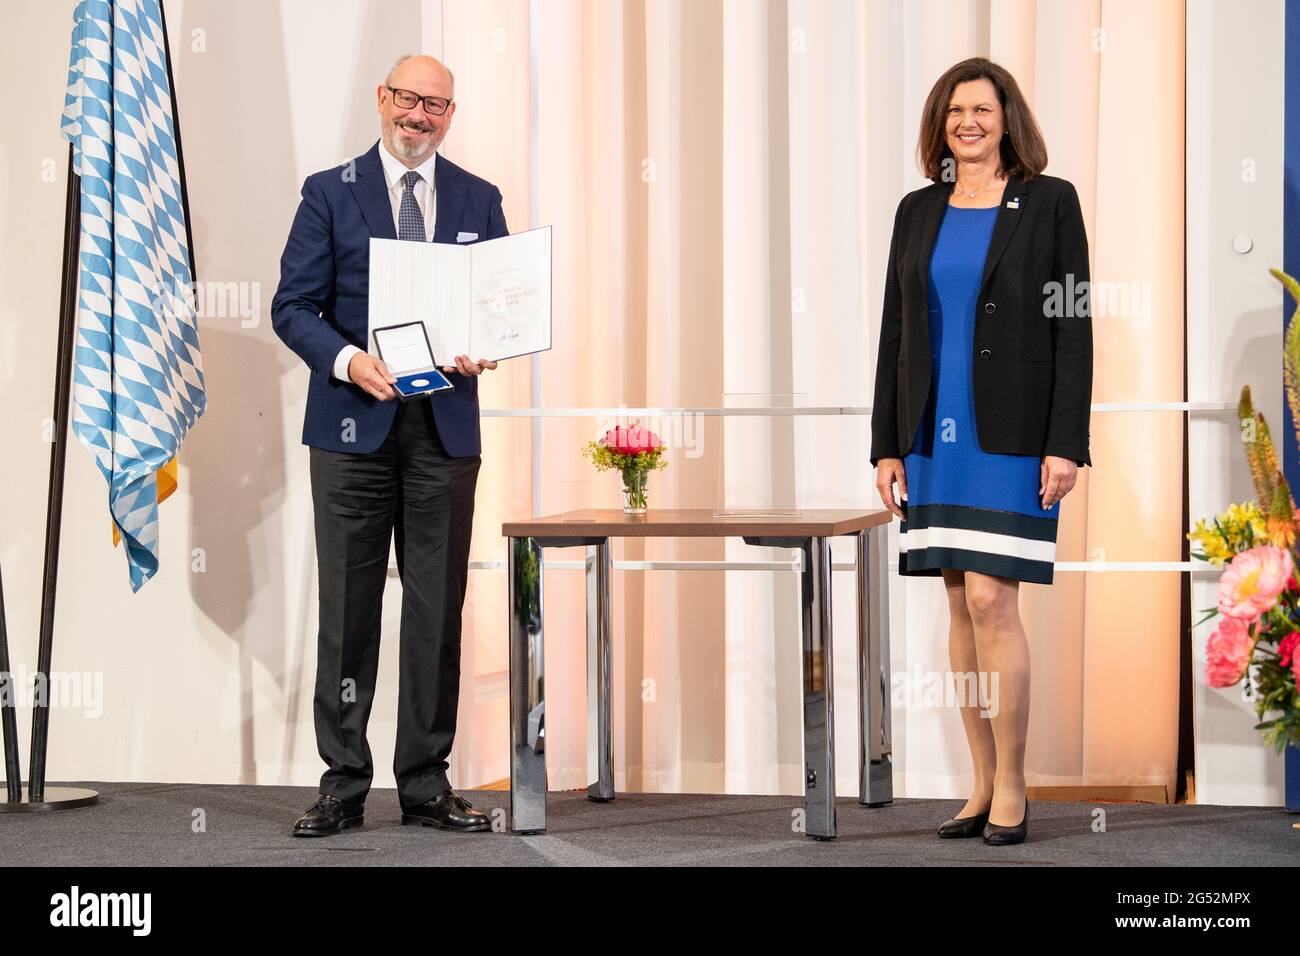 Munich, Germany. 25th June, 2021. Alexander Kain, Deputy Editor-in-Chief of  Passauer Neue Presse (l), holds his certificate and medal next to Ilse  Aigner (CSU), President of the Bavarian State Parliament, at the